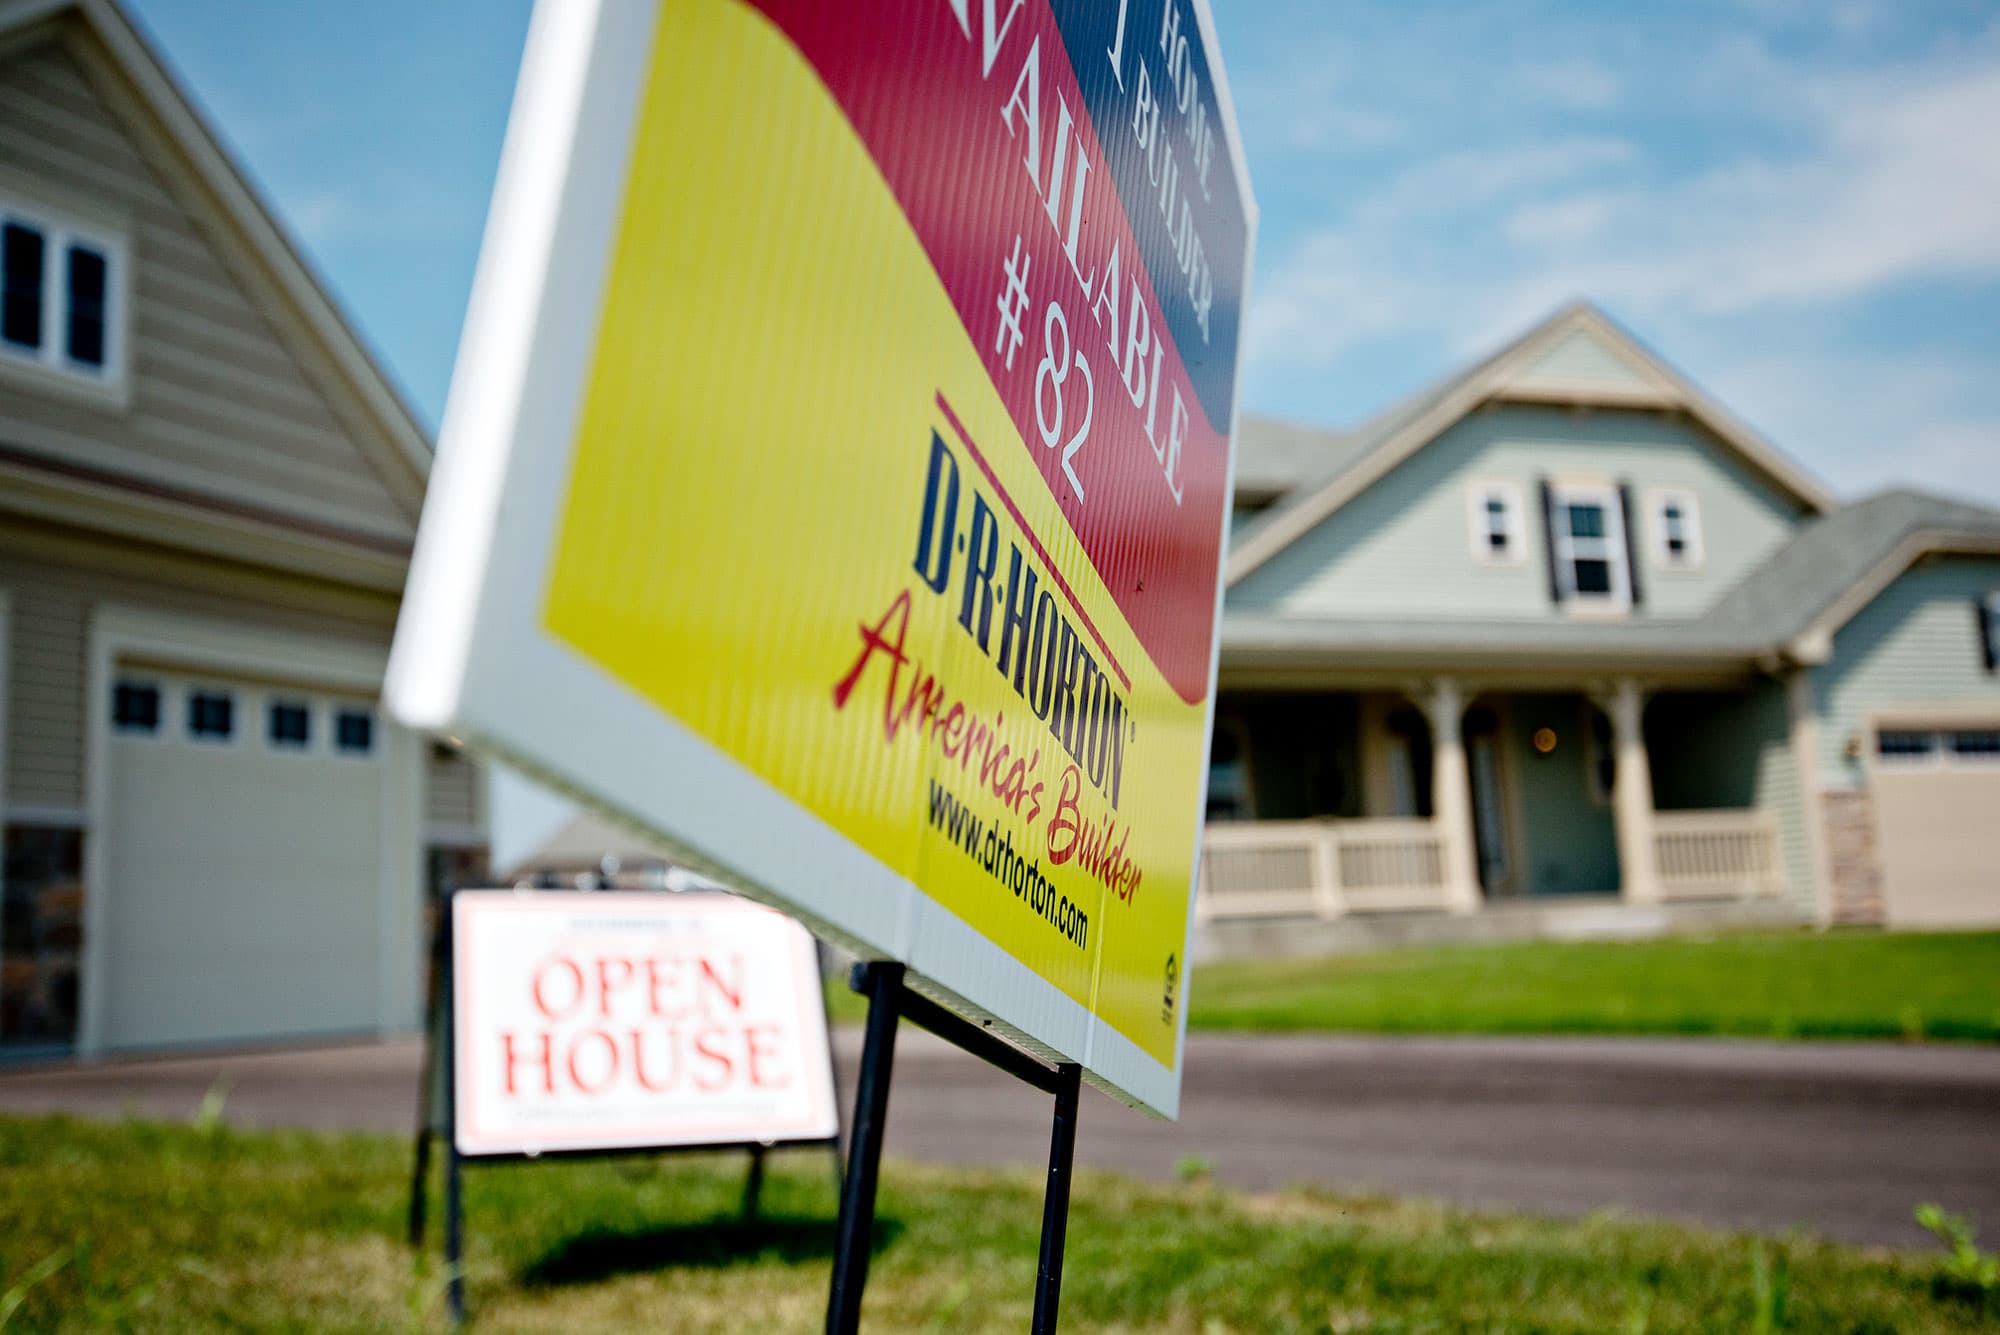 November new house sales fall more than expected, construction inventories fall